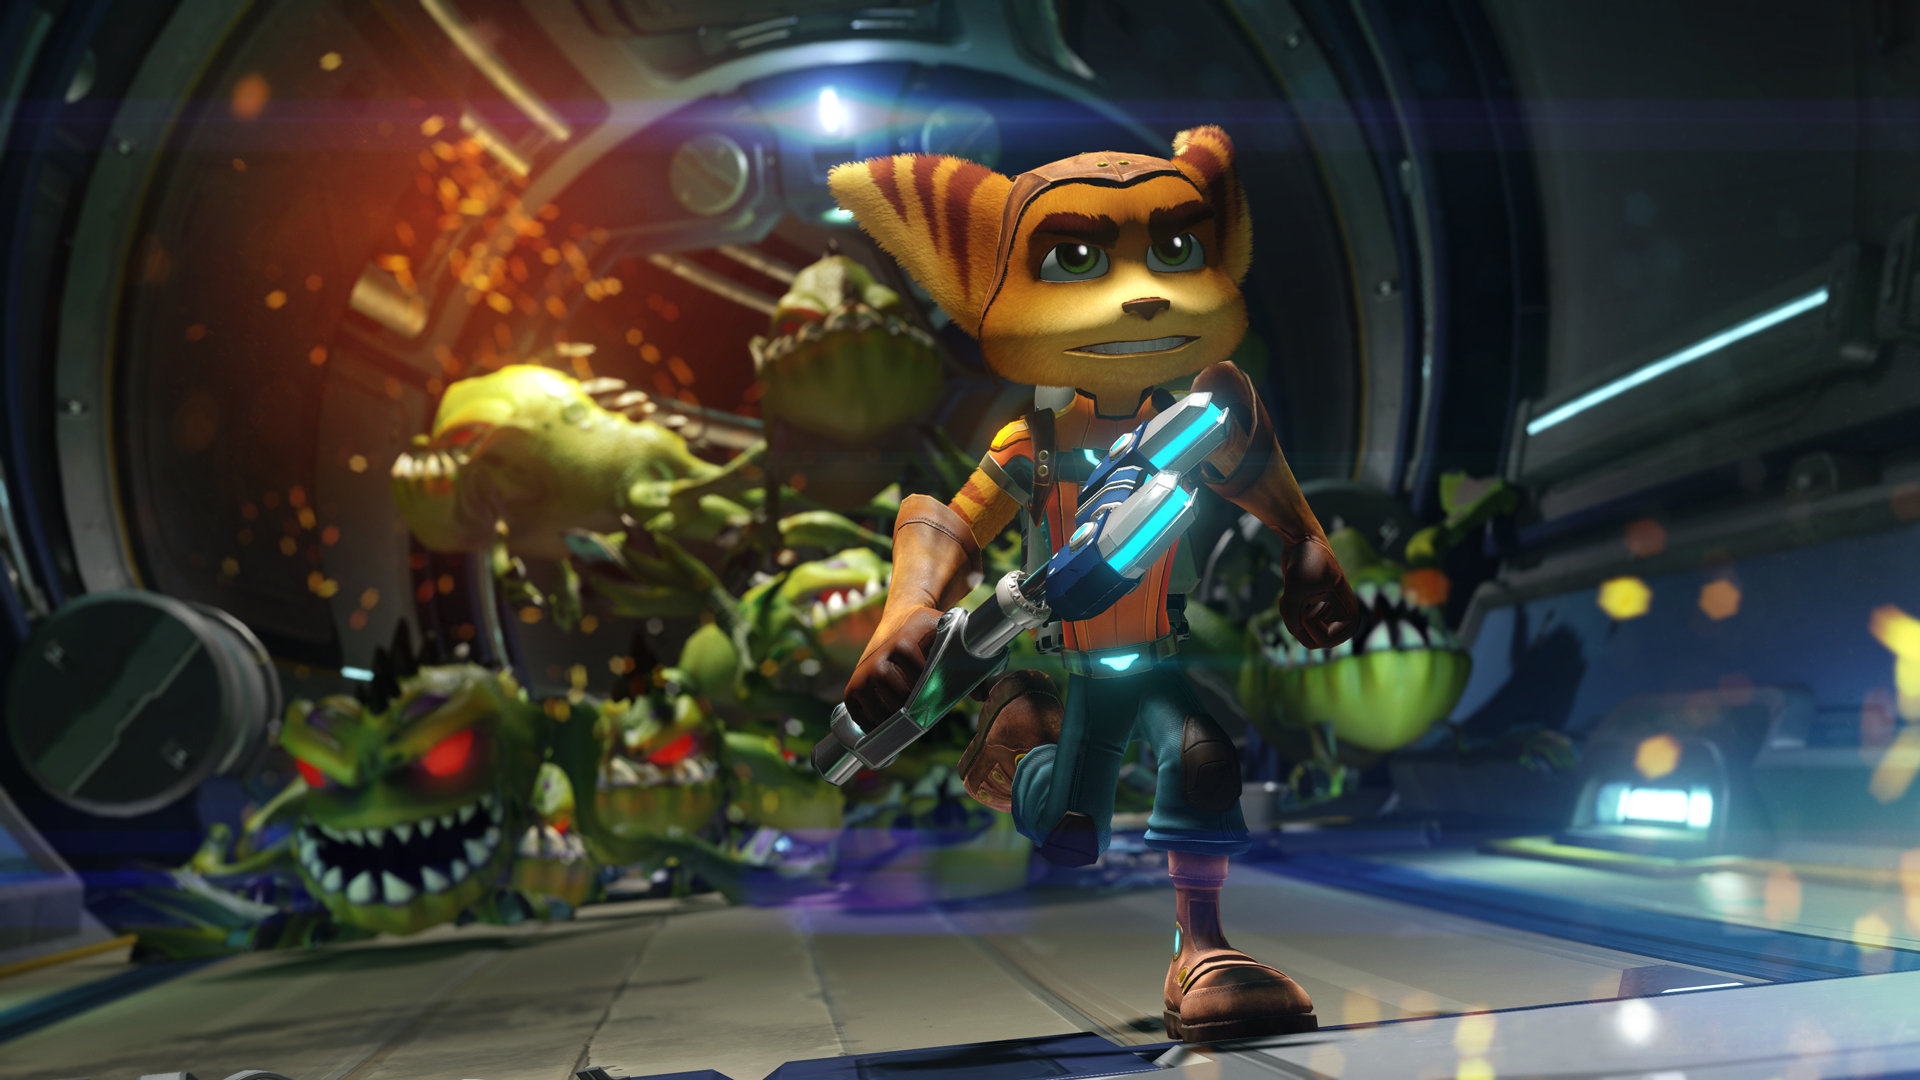 Ratchet and Clank PS4 PHOTOS